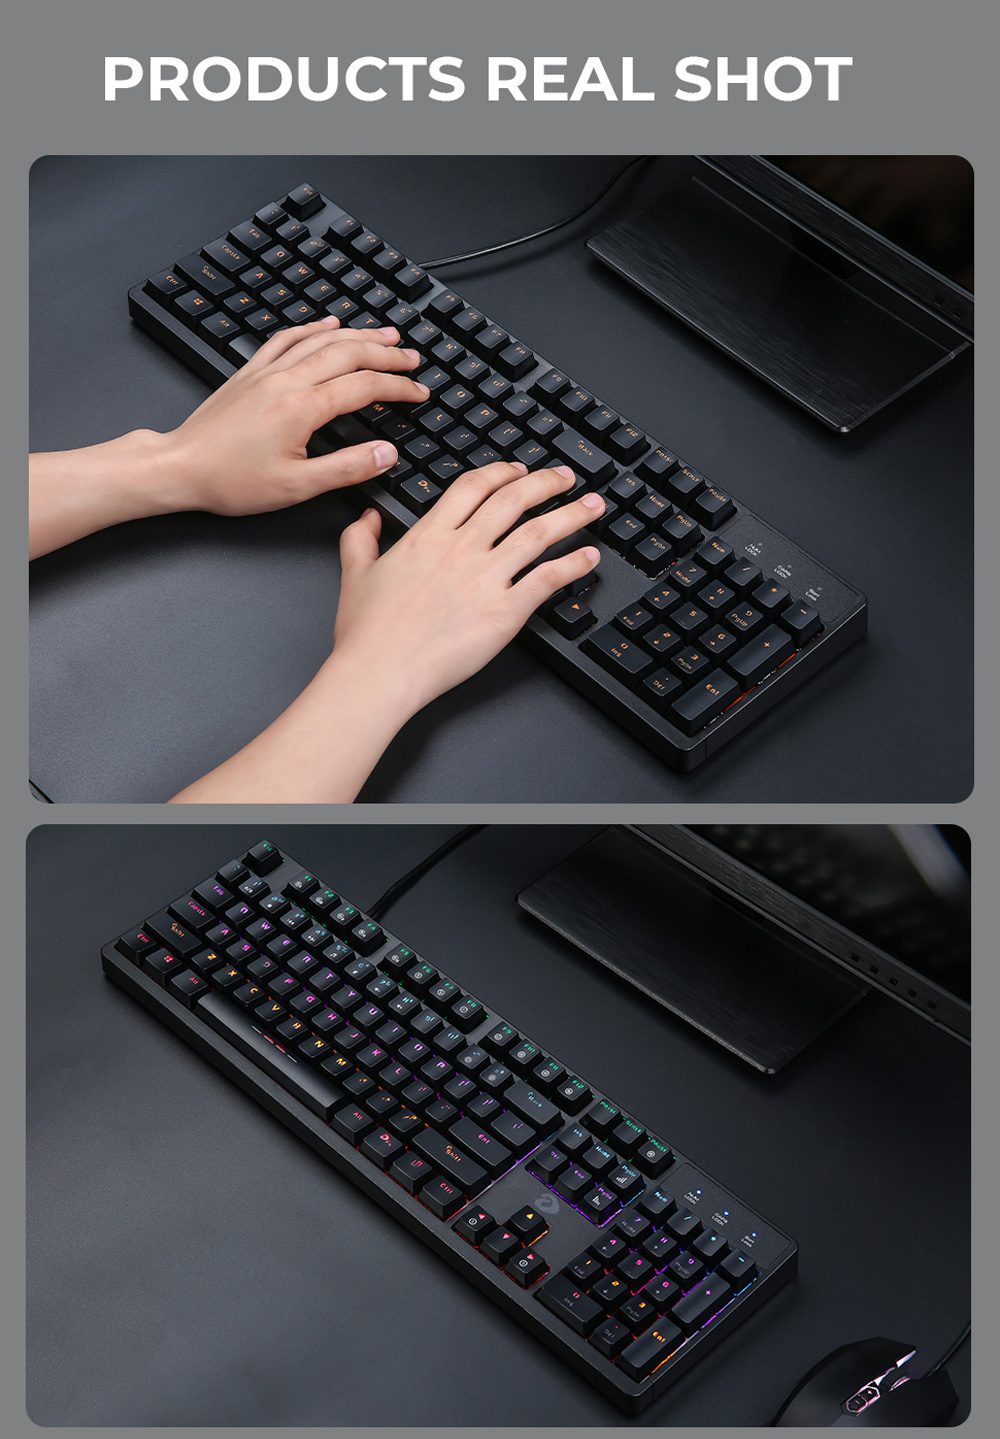 DAREU Wired Mechanical Keyboard Ergonomic RGB Backlight Gaming Keyboard with Multimedia Buttons Full Key Conflict-free